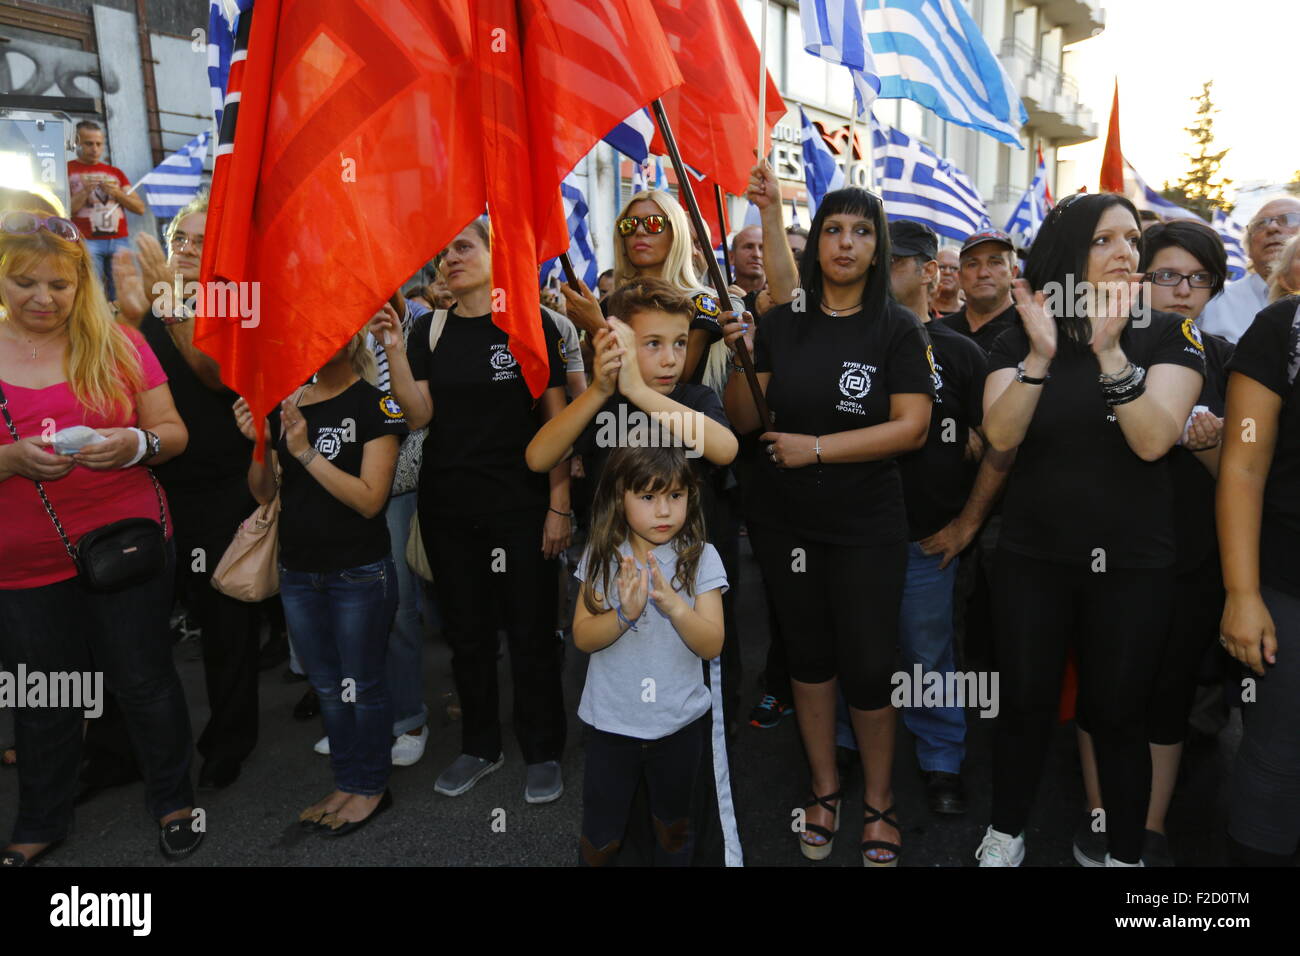 Athens, Greece. 16th September 2015. A boy and a girl attend the Golden Dawn election rally. Greek right wing  party Golden Dawn held an election rally in Athens, four days ahead of election day. The party hopes to gain enough seats in the election to become the third latest party in the Greek Parliament. Credit:  Michael Debets/Alamy Live News Stock Photo